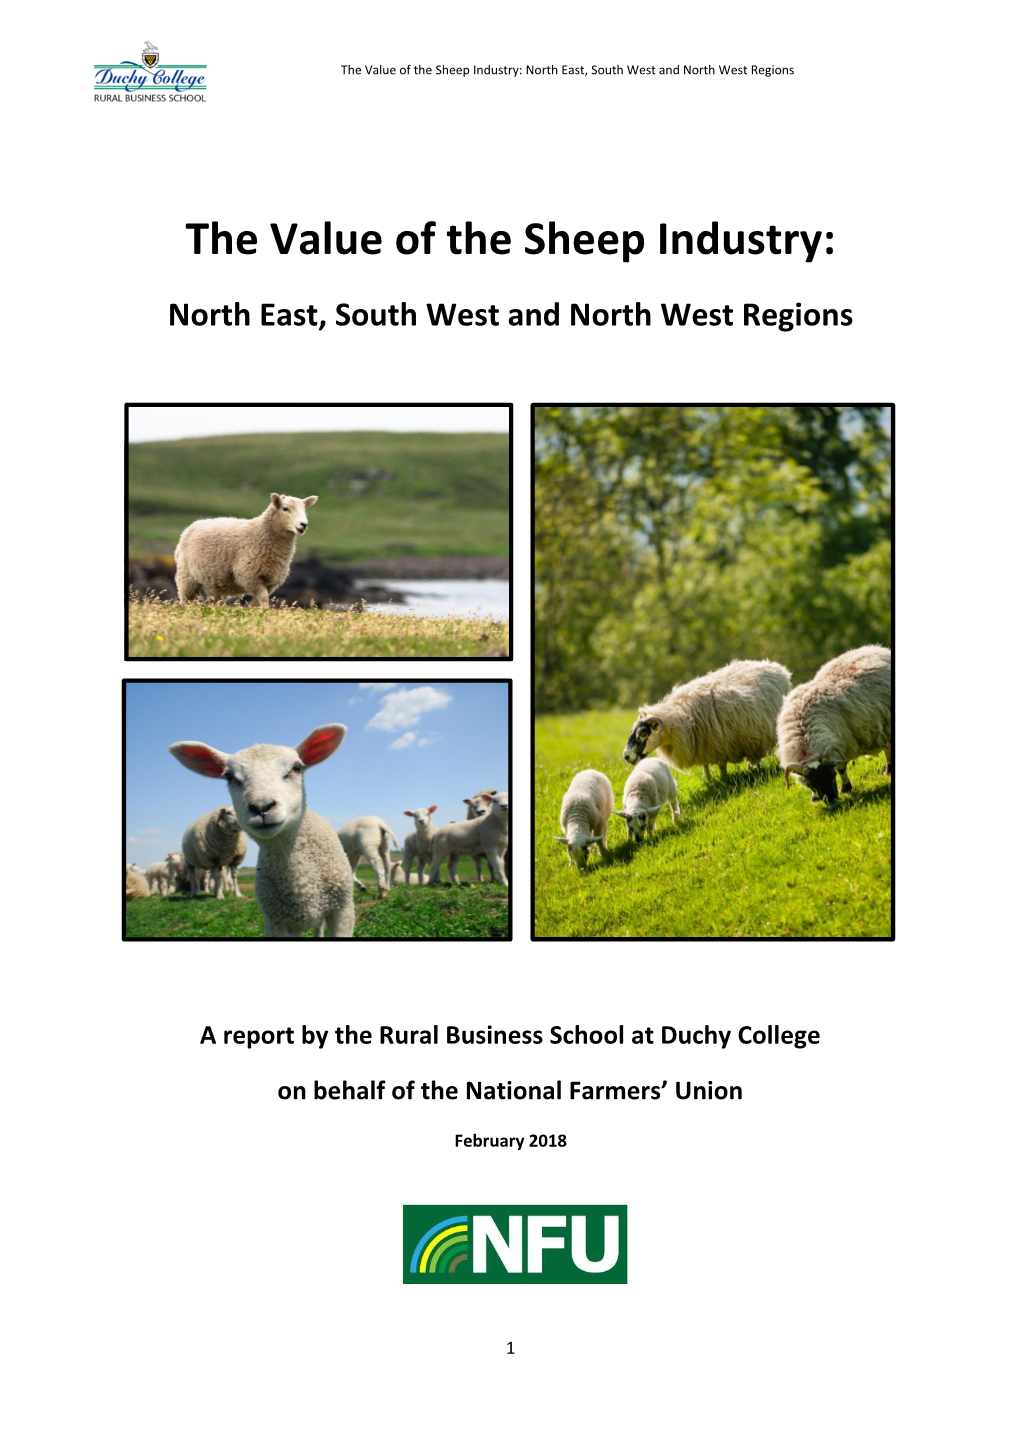 The Value of the Sheep Industry: North East, South West and North West Regions